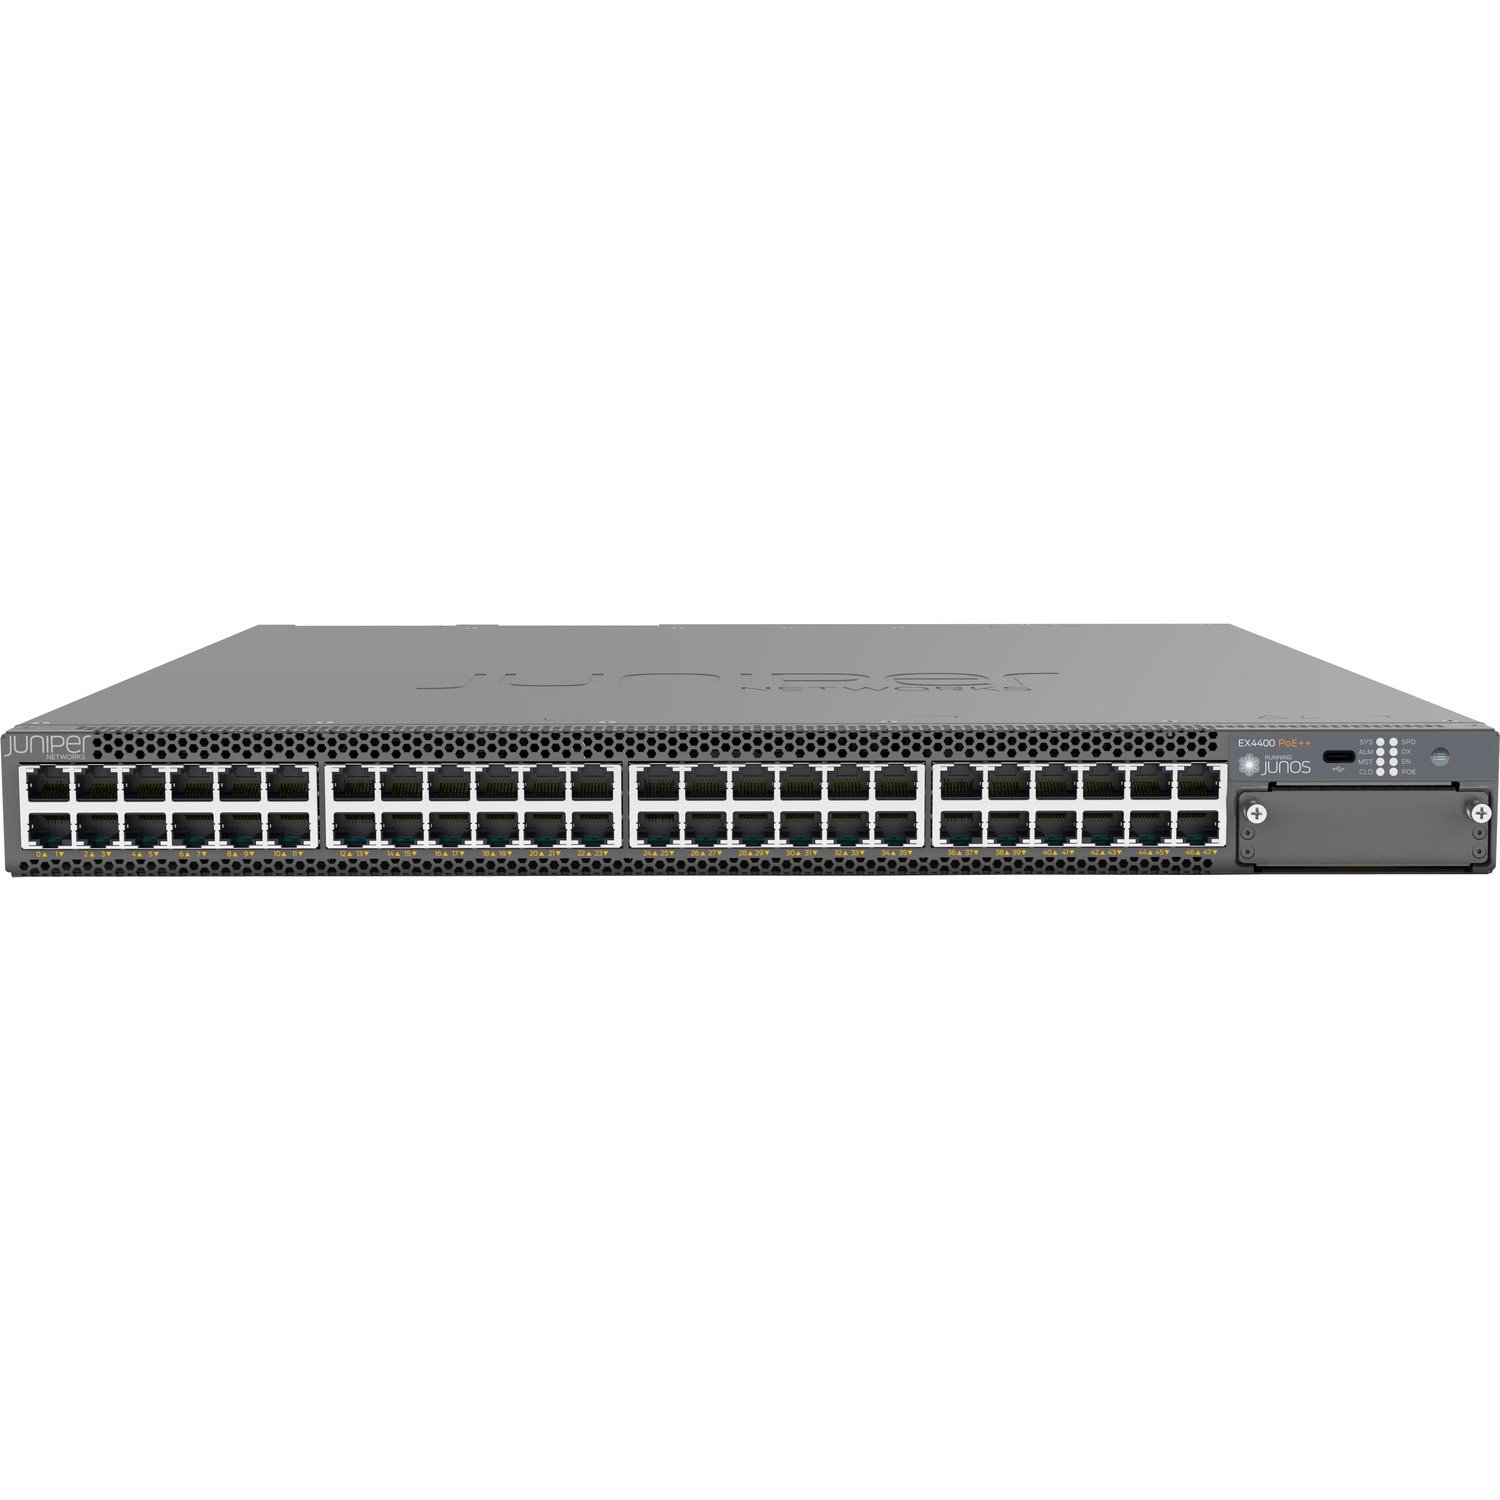 Juniper EX4400 EX4400-48P 48 Ports Manageable Ethernet Switch